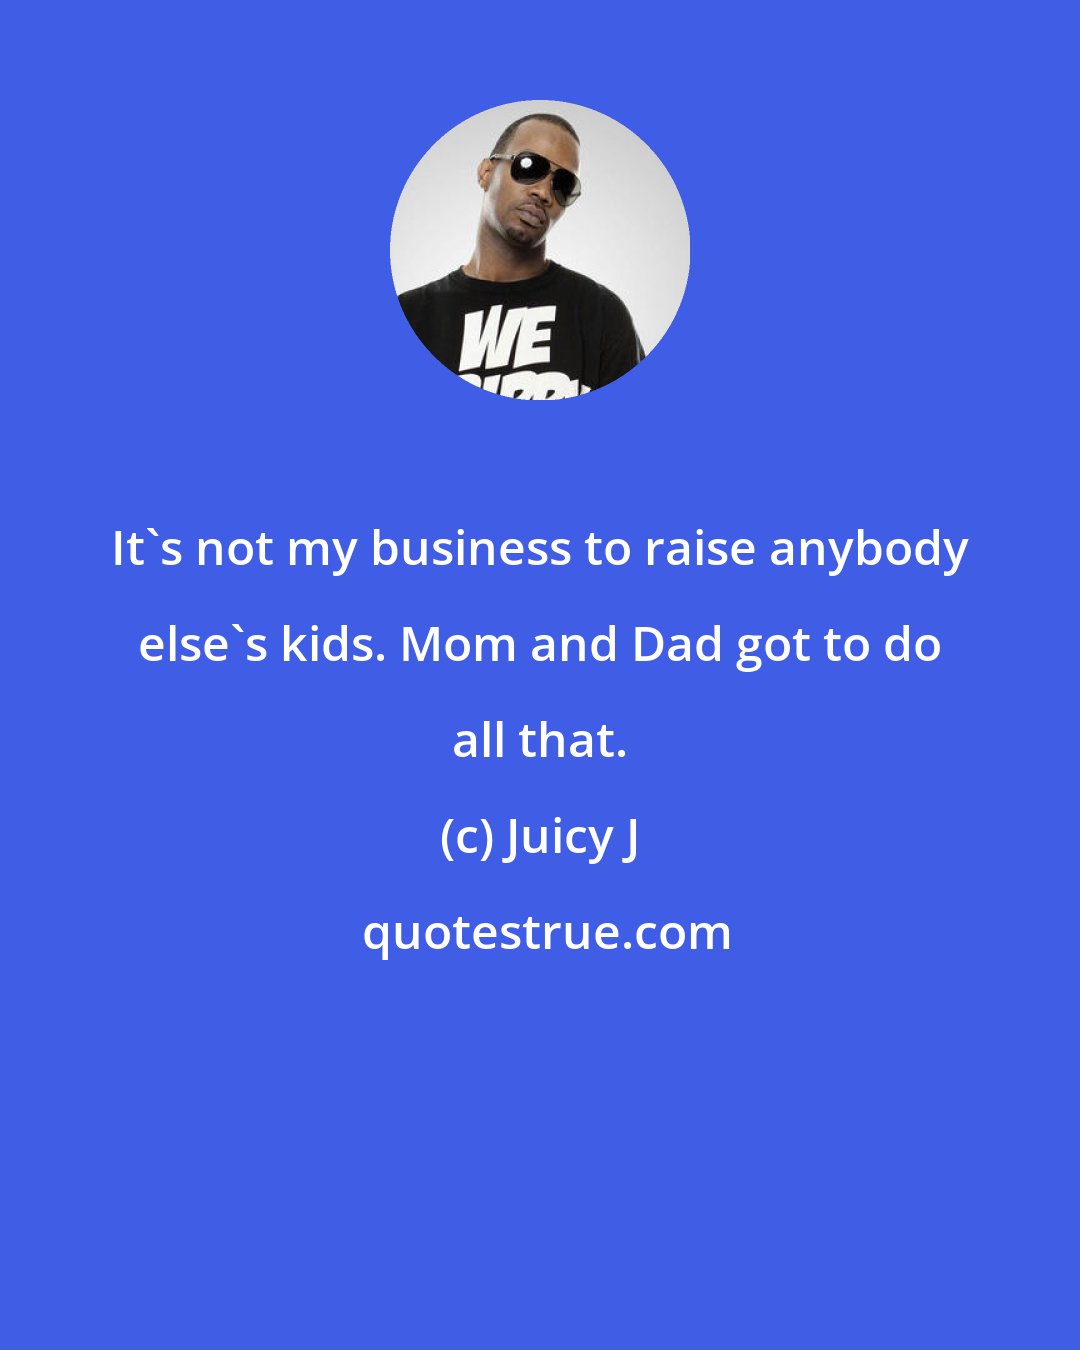 Juicy J: It's not my business to raise anybody else's kids. Mom and Dad got to do all that.